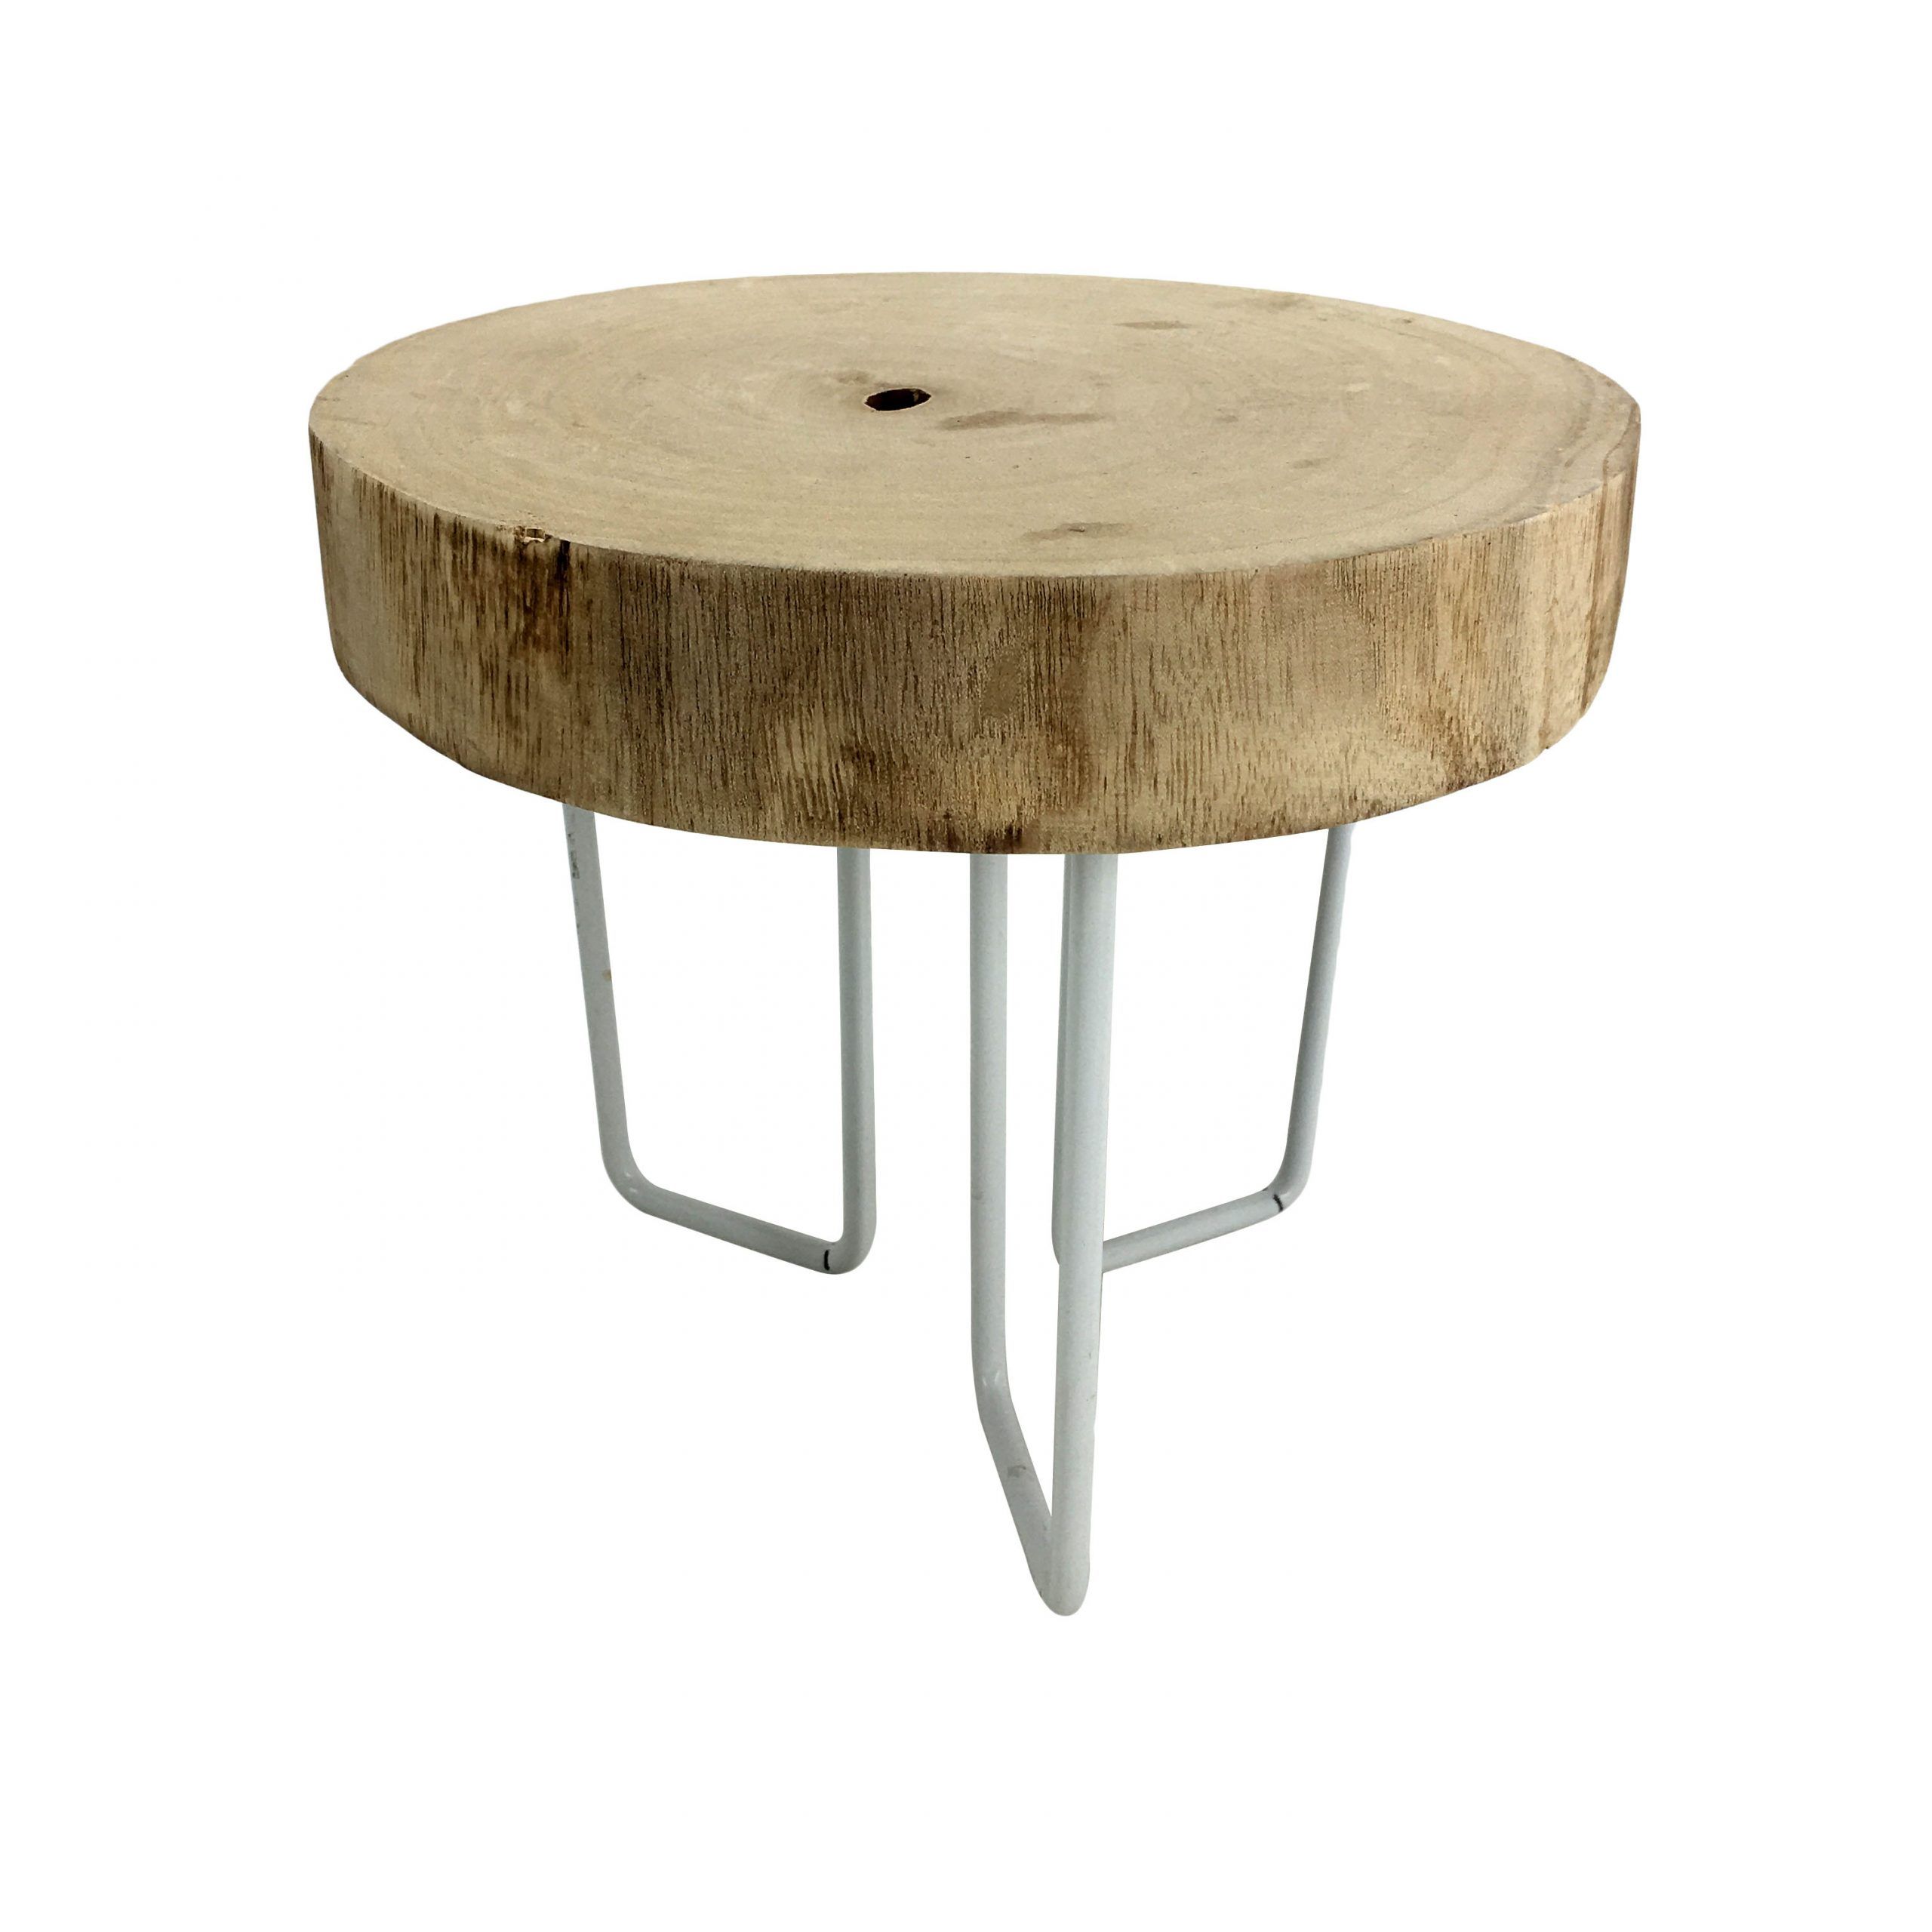 Classical Wooden Small Natural Cheap Round Tea Coffee Side Mdf Table Pertaining To Natural Wood Outdoor Side Tables (View 7 of 15)